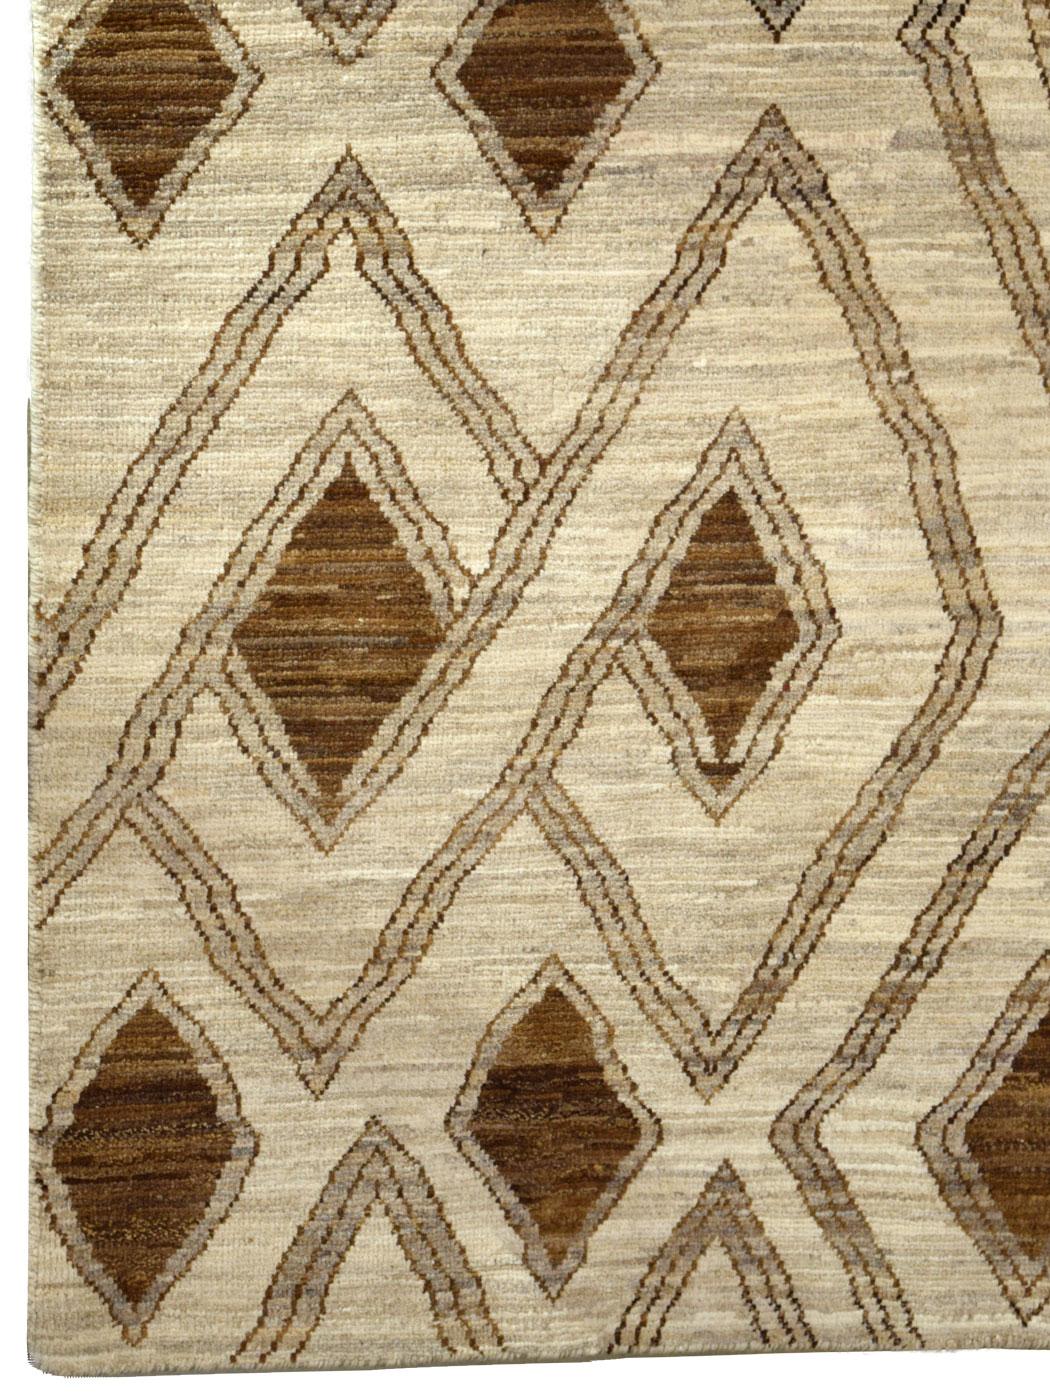 Geometric Neutral Wool Carpet in Brown and Cream, 6' x 9' In New Condition For Sale In New York, NY